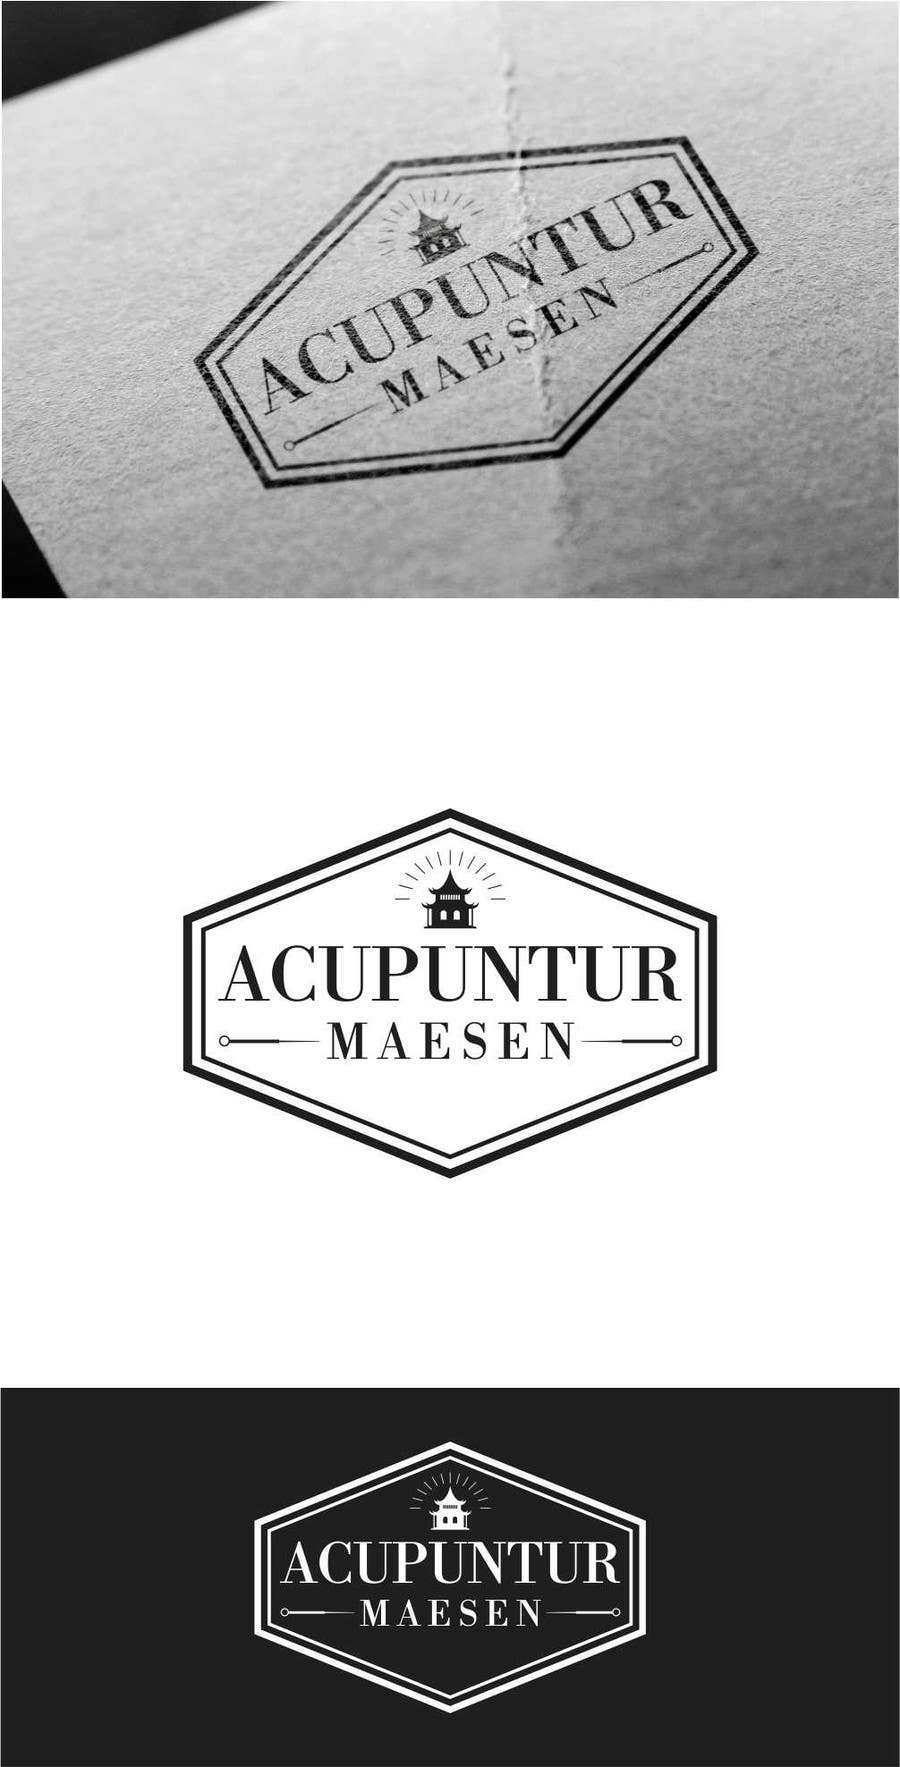 Proposition n°25 du concours                                                 Typographic logo for acupunture practice
                                            